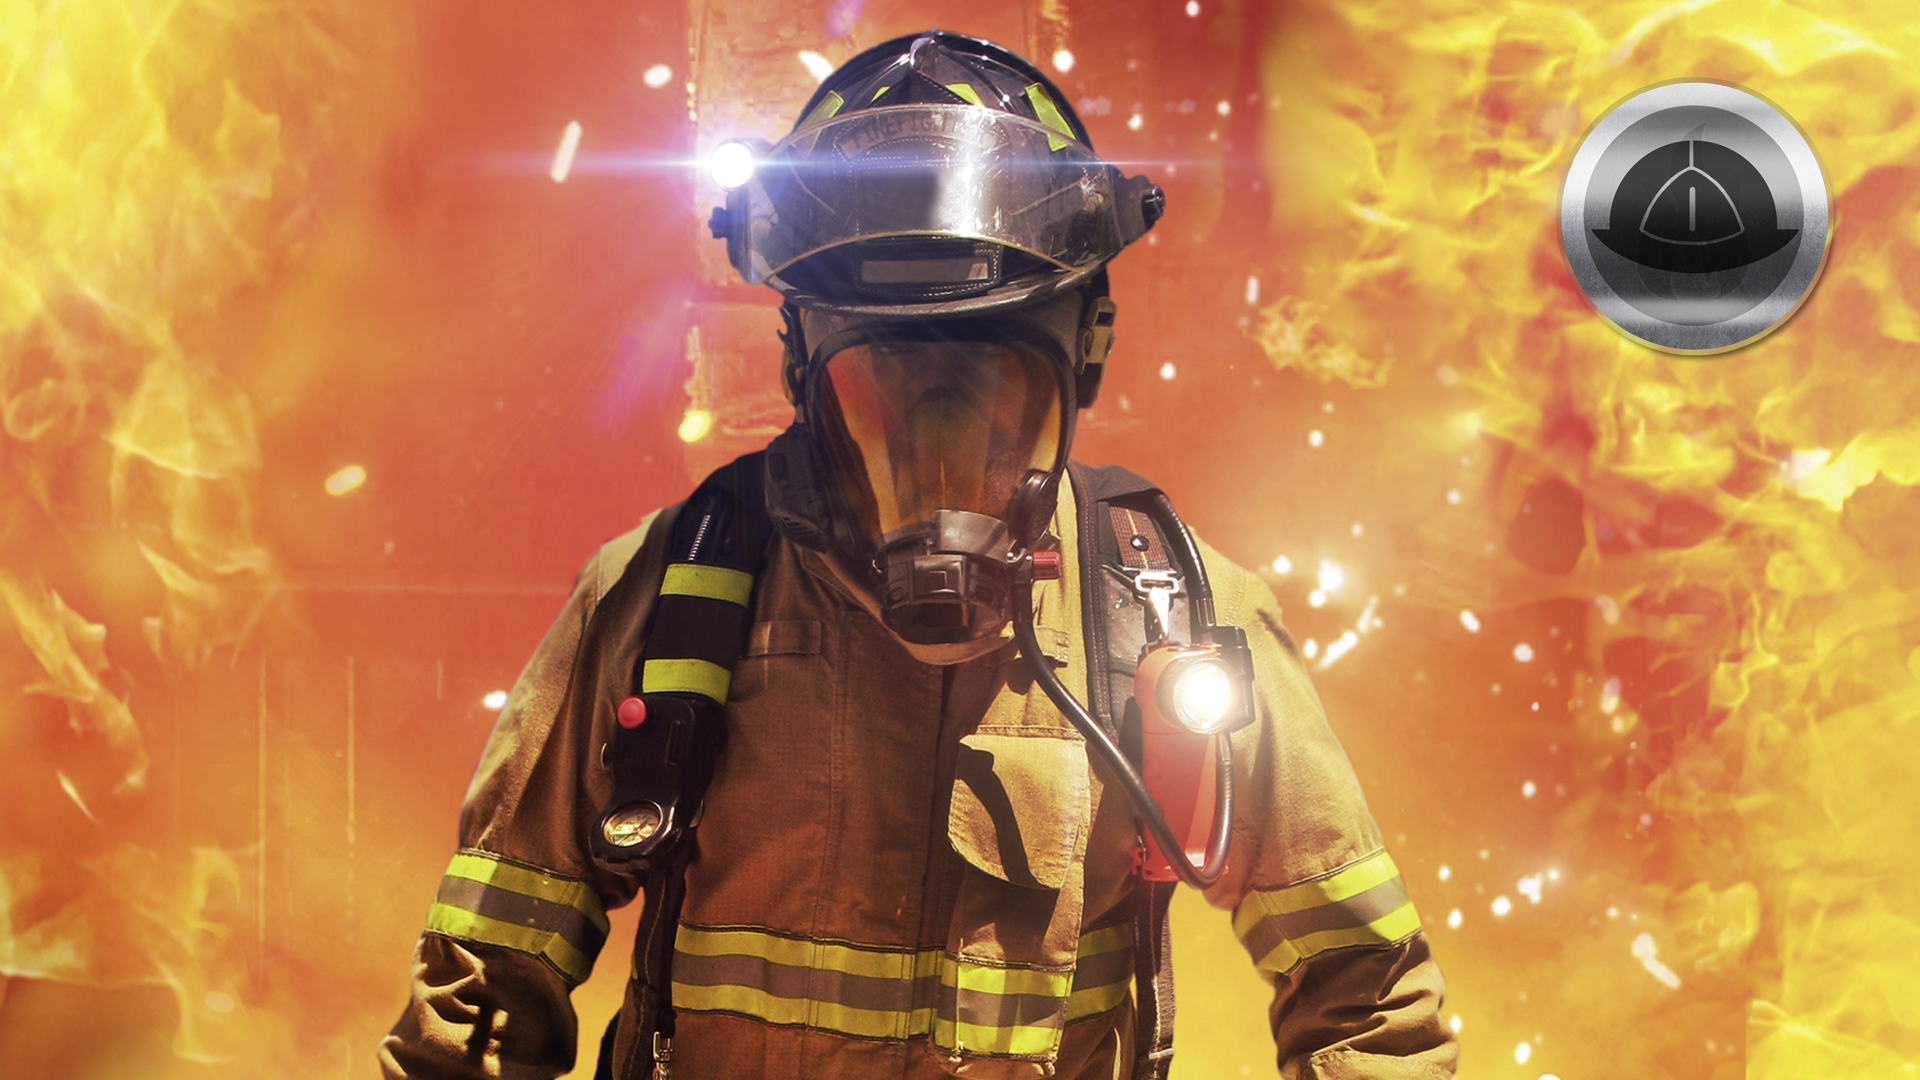 Icon for Fireman